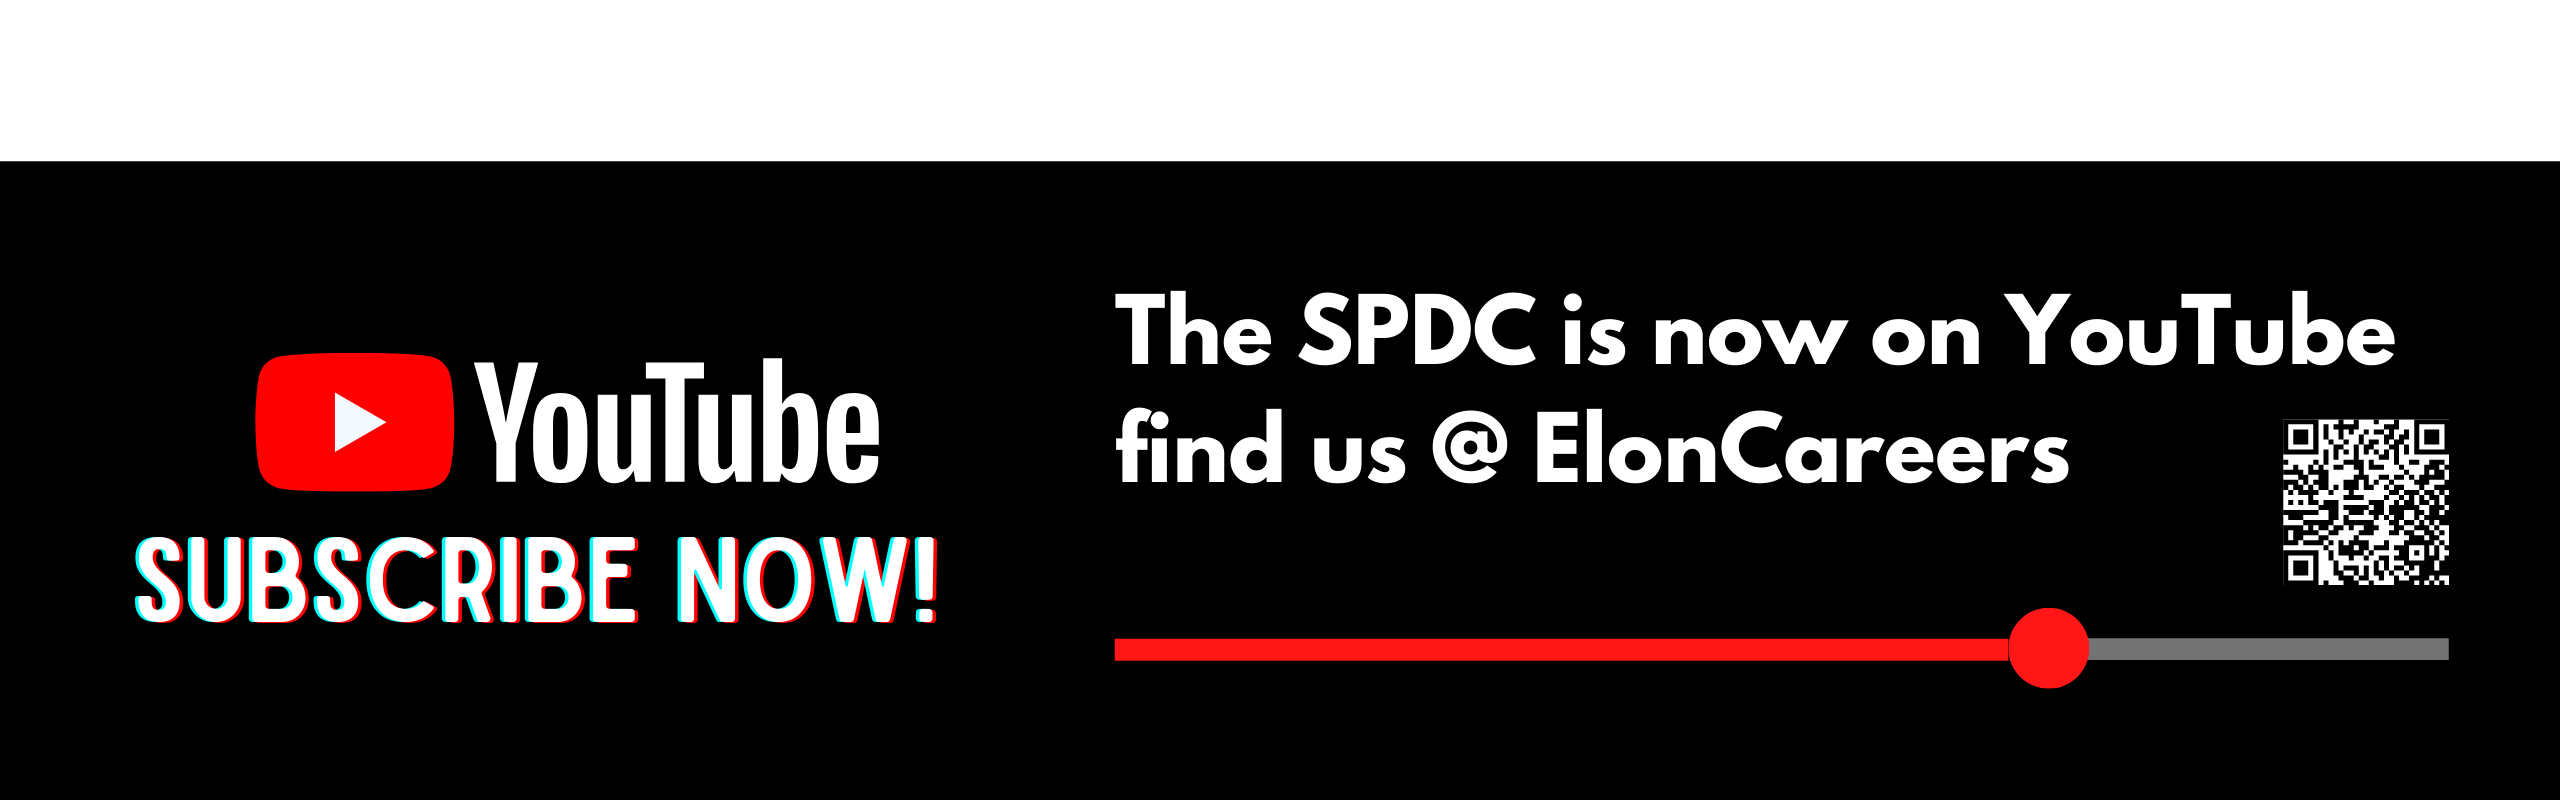 The SPDC is on YouTube @ElonCareers